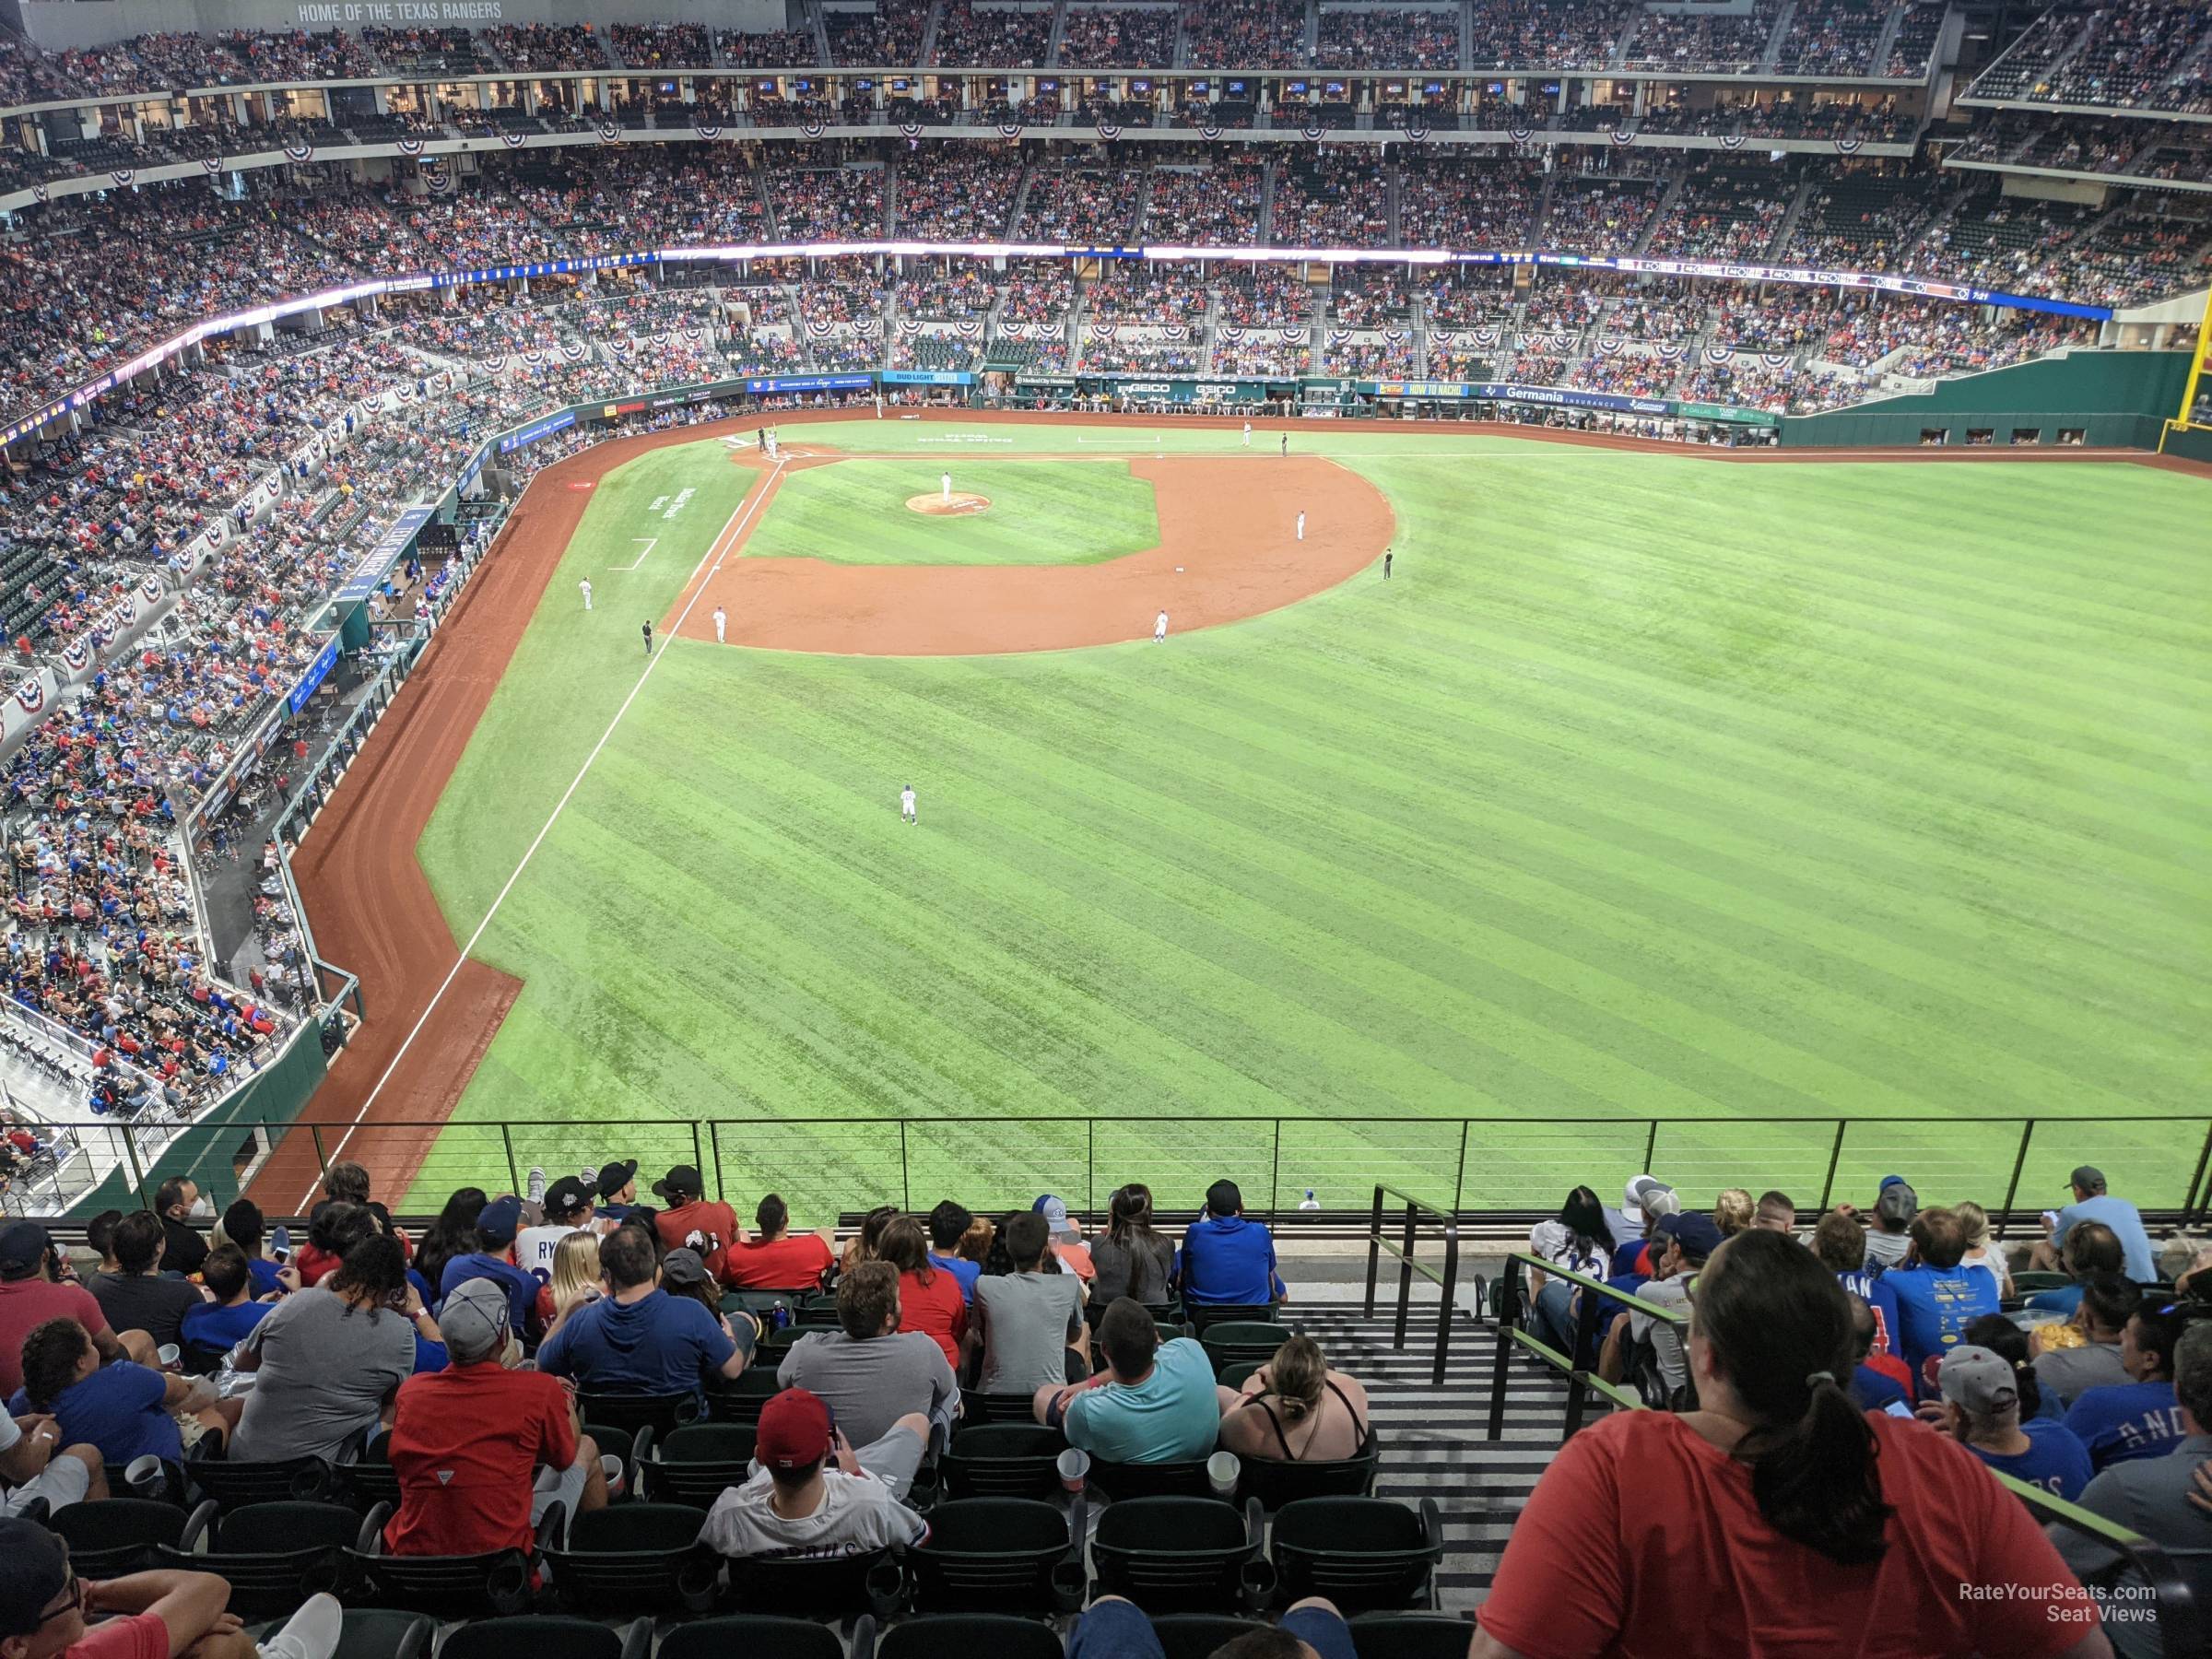 Section 233 at Globe Life Field 